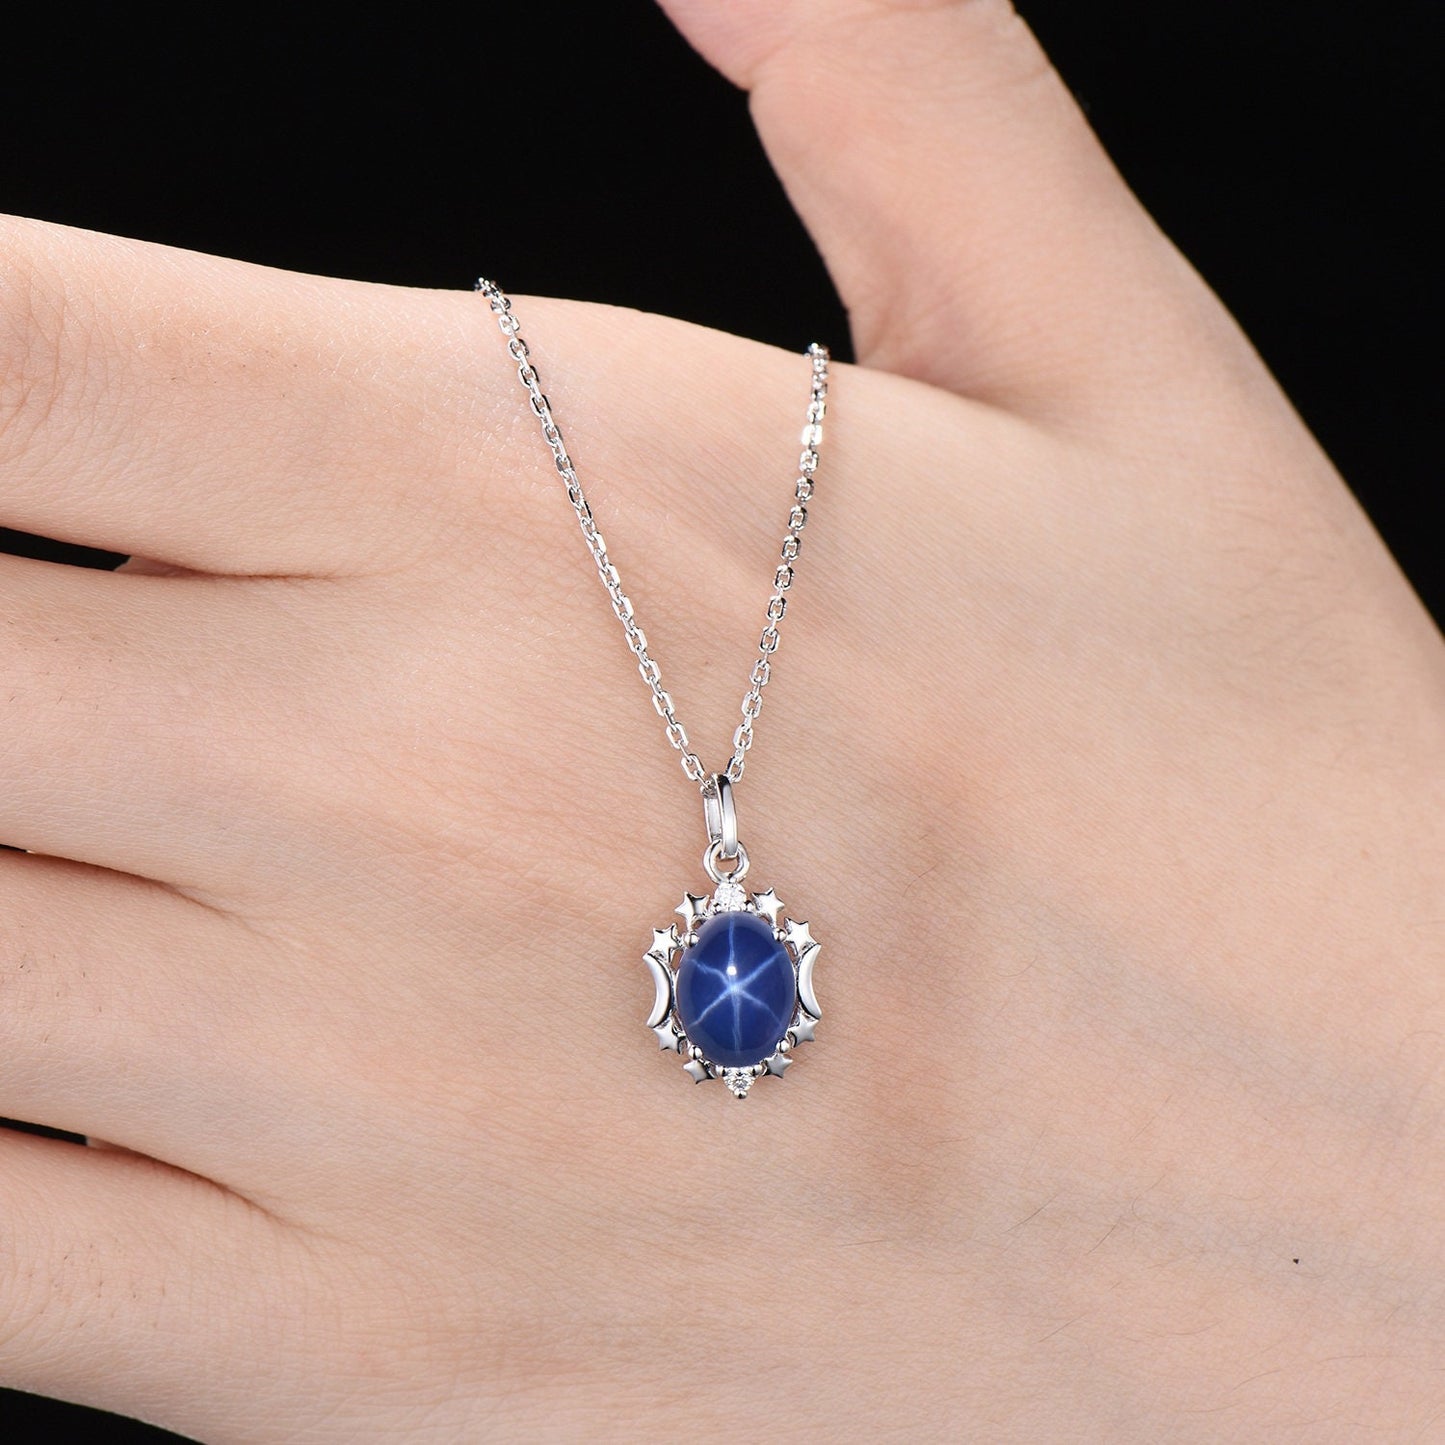 Oval Star Blue Sapphire Necklace 14K Gold Moon Star Halo Wedding Necklace Star Blue Bridal Solitaire Pendant Necklace Unique Promise Gifts